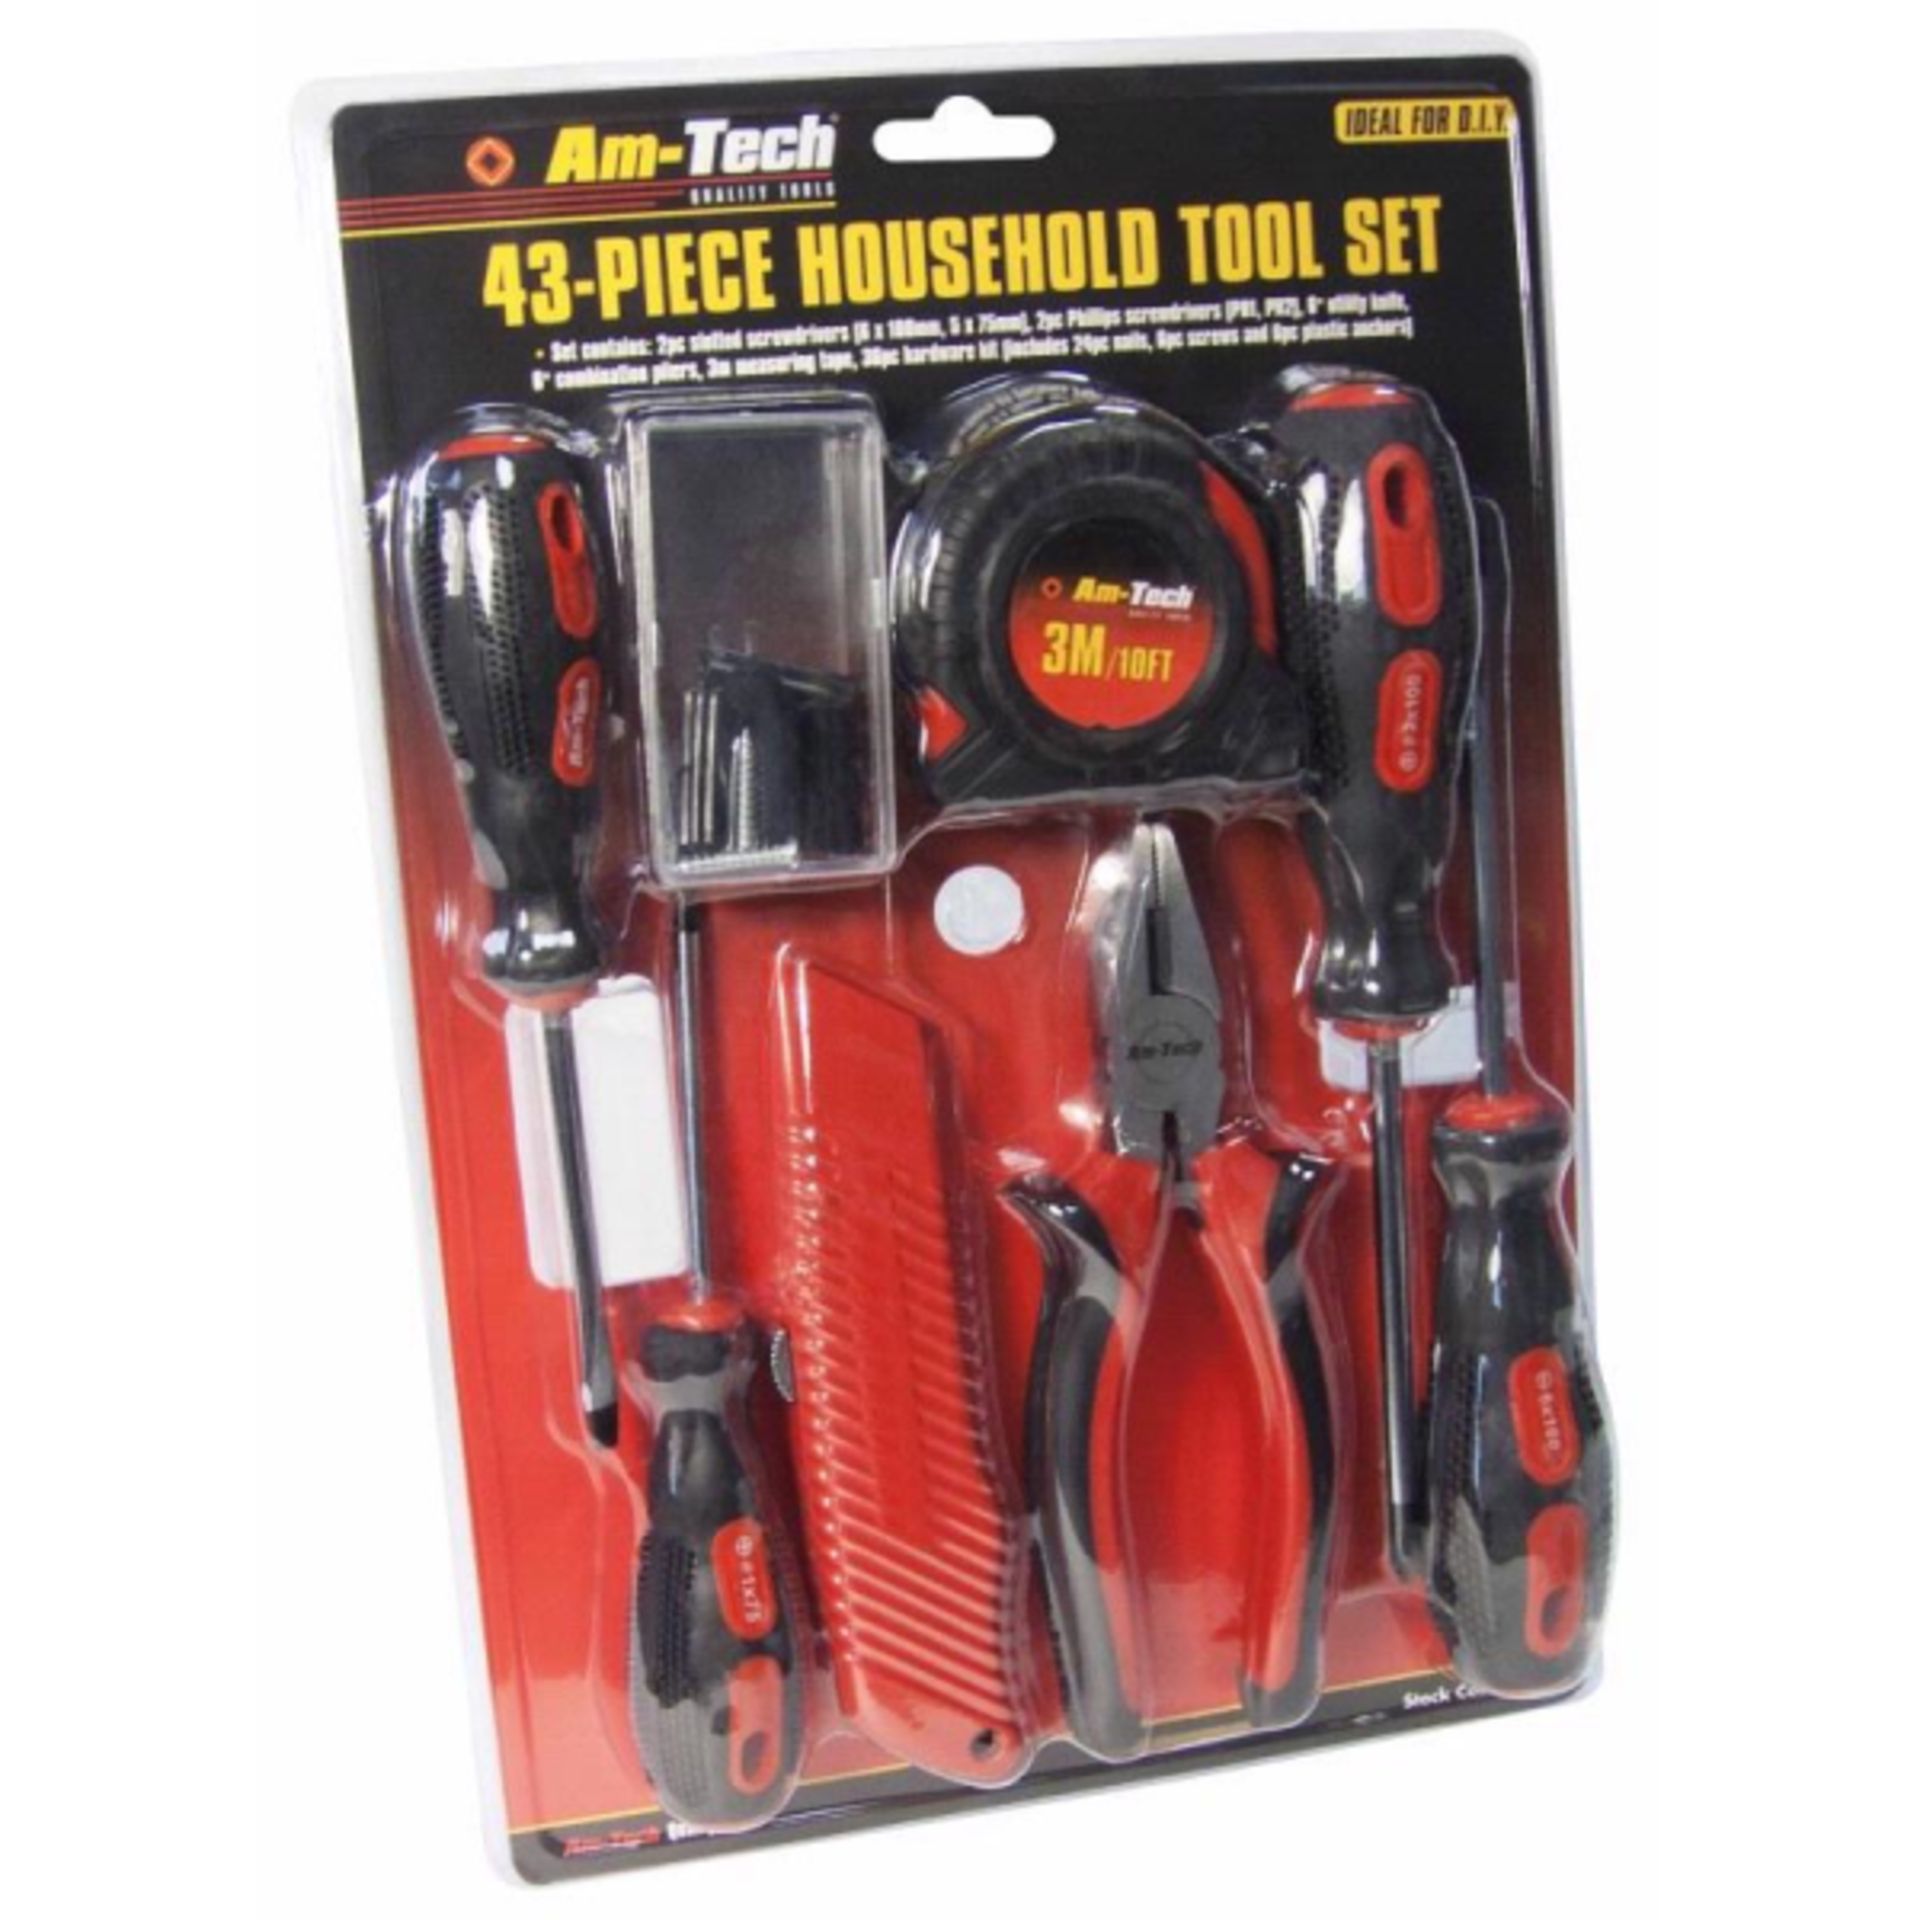 V *TRADE QTY* Brand New Forty Three Piece Household Tool Set Inc Pliers, Screwdrivers Etc X 5 YOUR